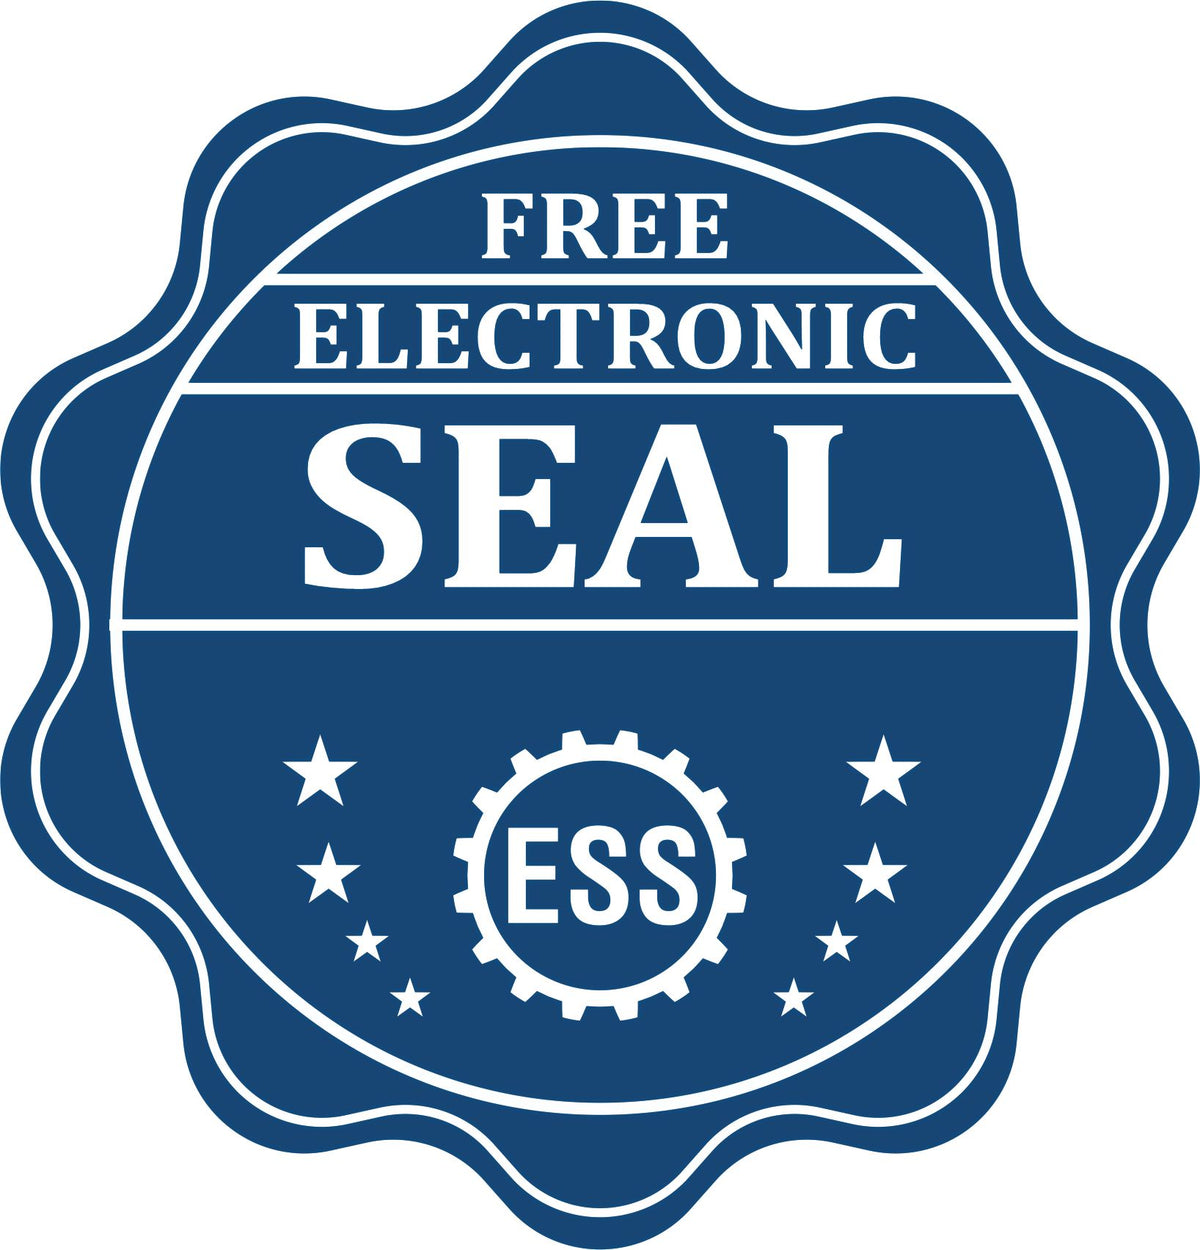 A badge showing a free electronic seal for the Soft Florida Professional Engineer Seal with stars and the ESS gear on the emblem.